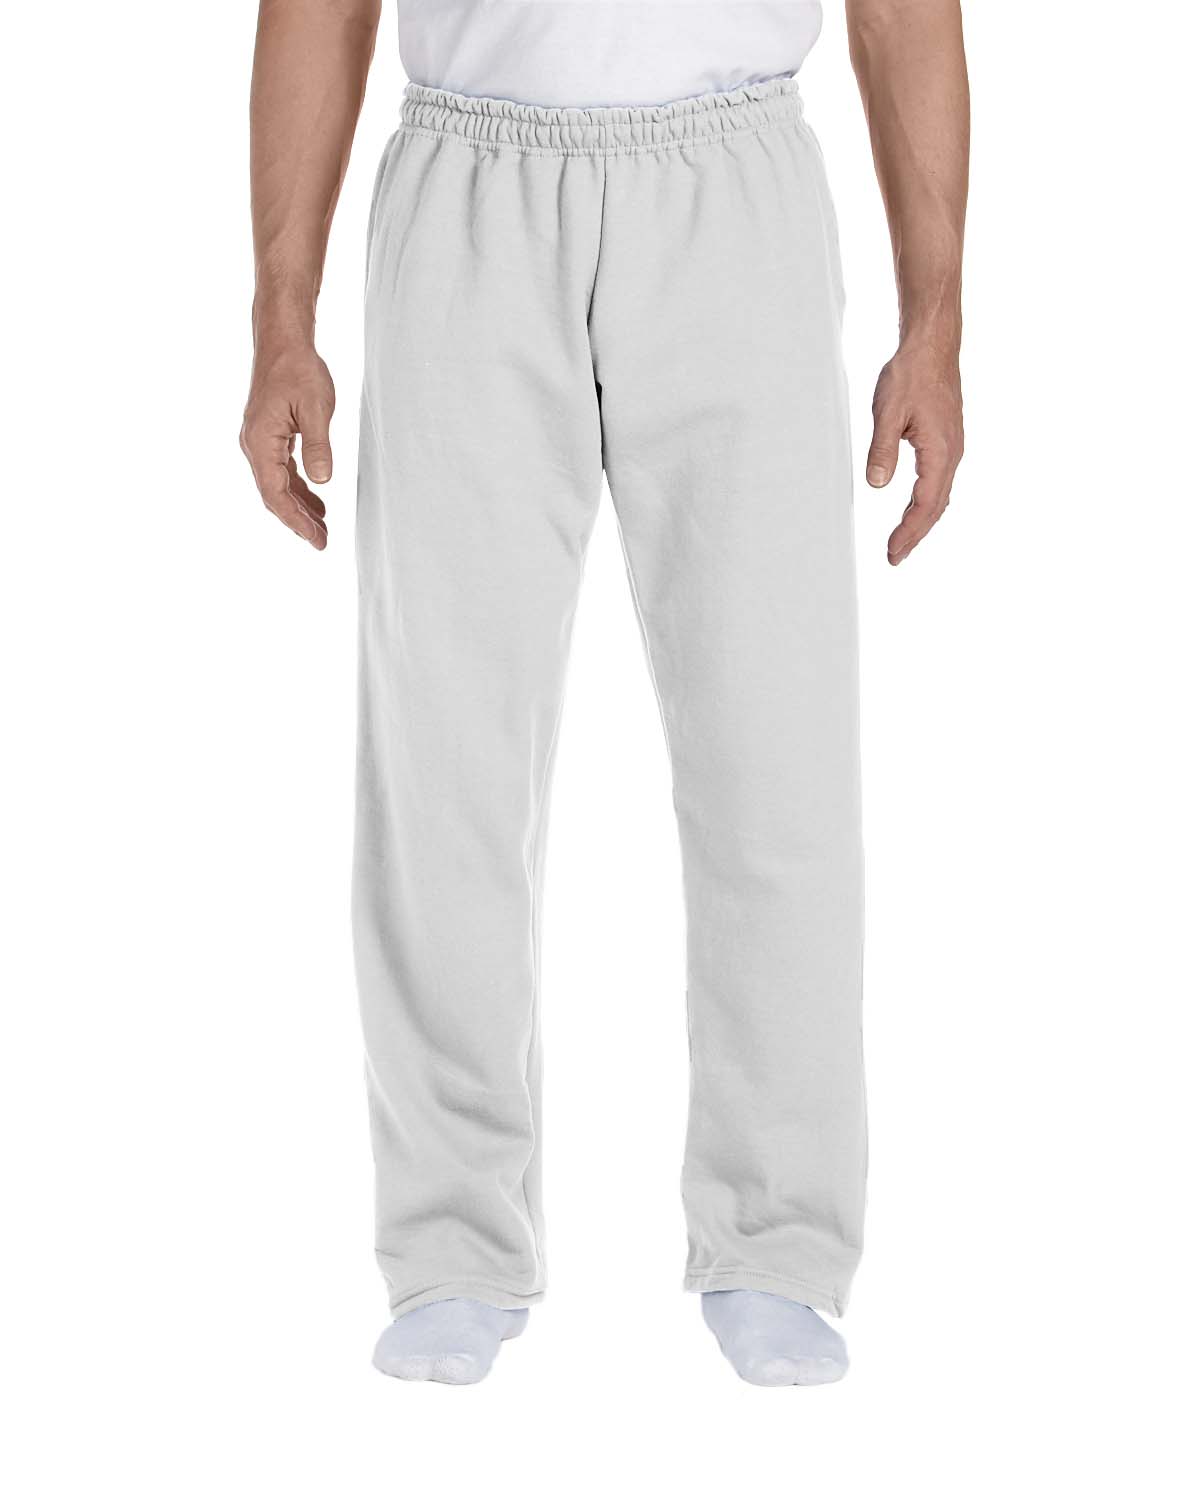 Size Small to 5 X Large Open Bottom Sweatpants by Gildan 